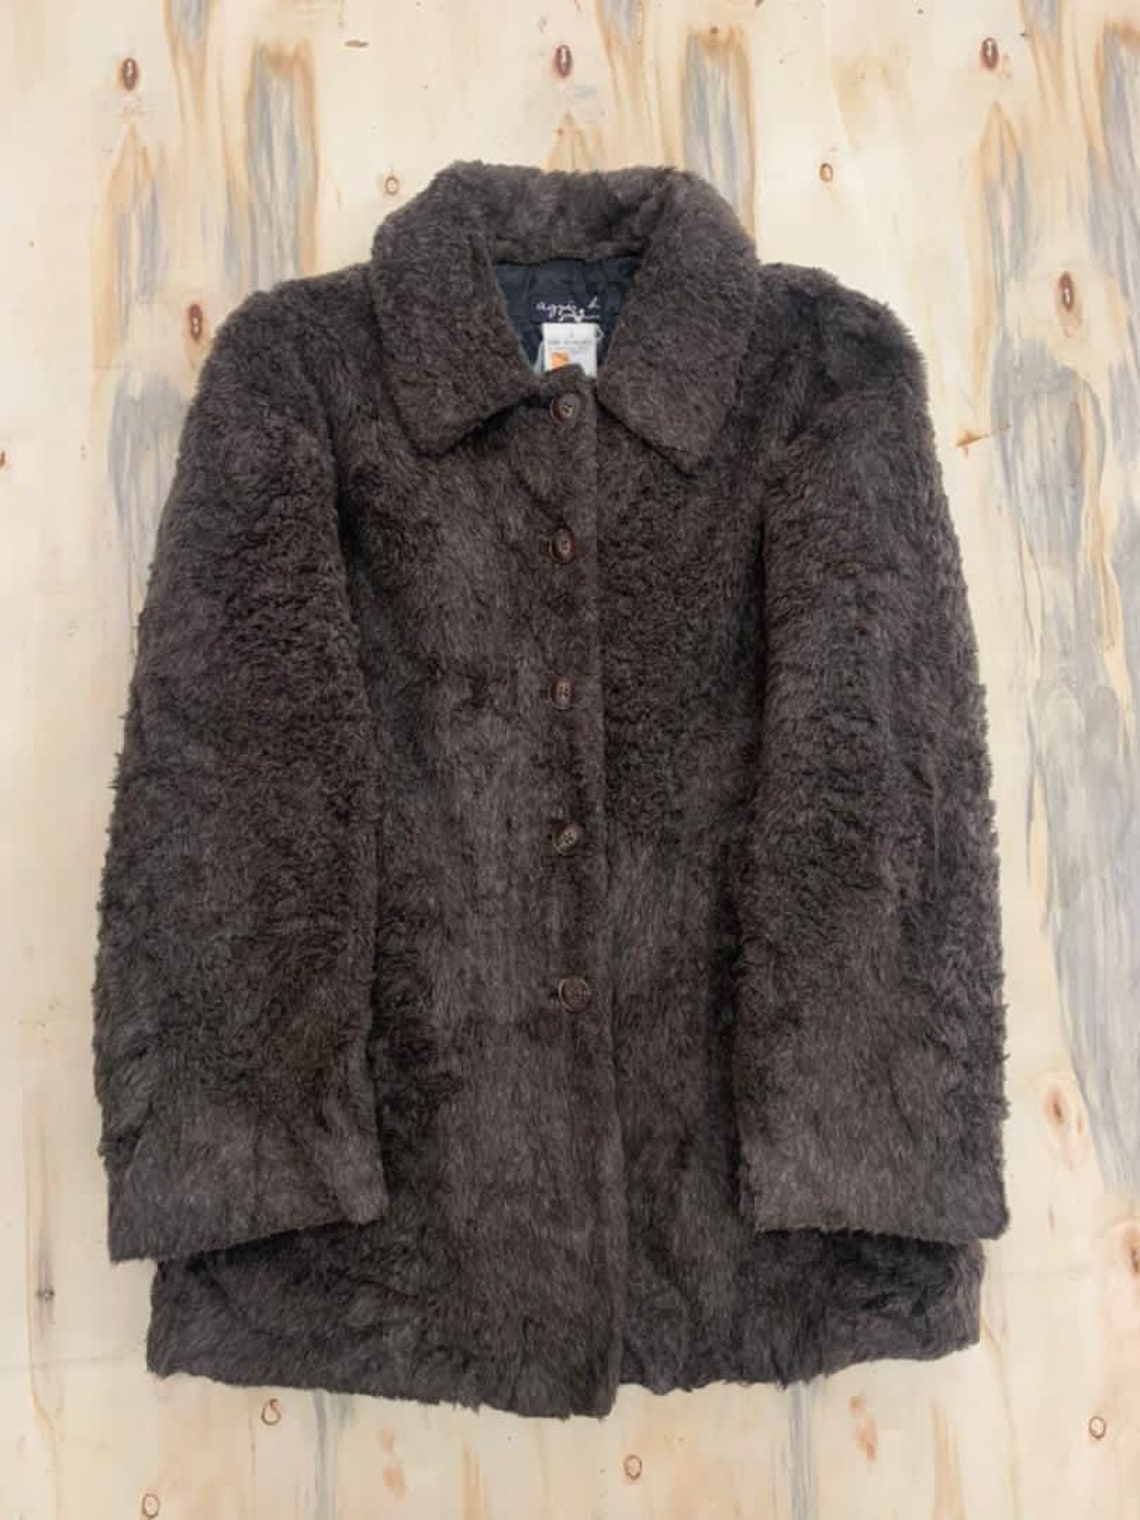 Agnes B. Wool Faux Fur Jacket Buttoned Brown Wool Jacket Pg18 - Etsy